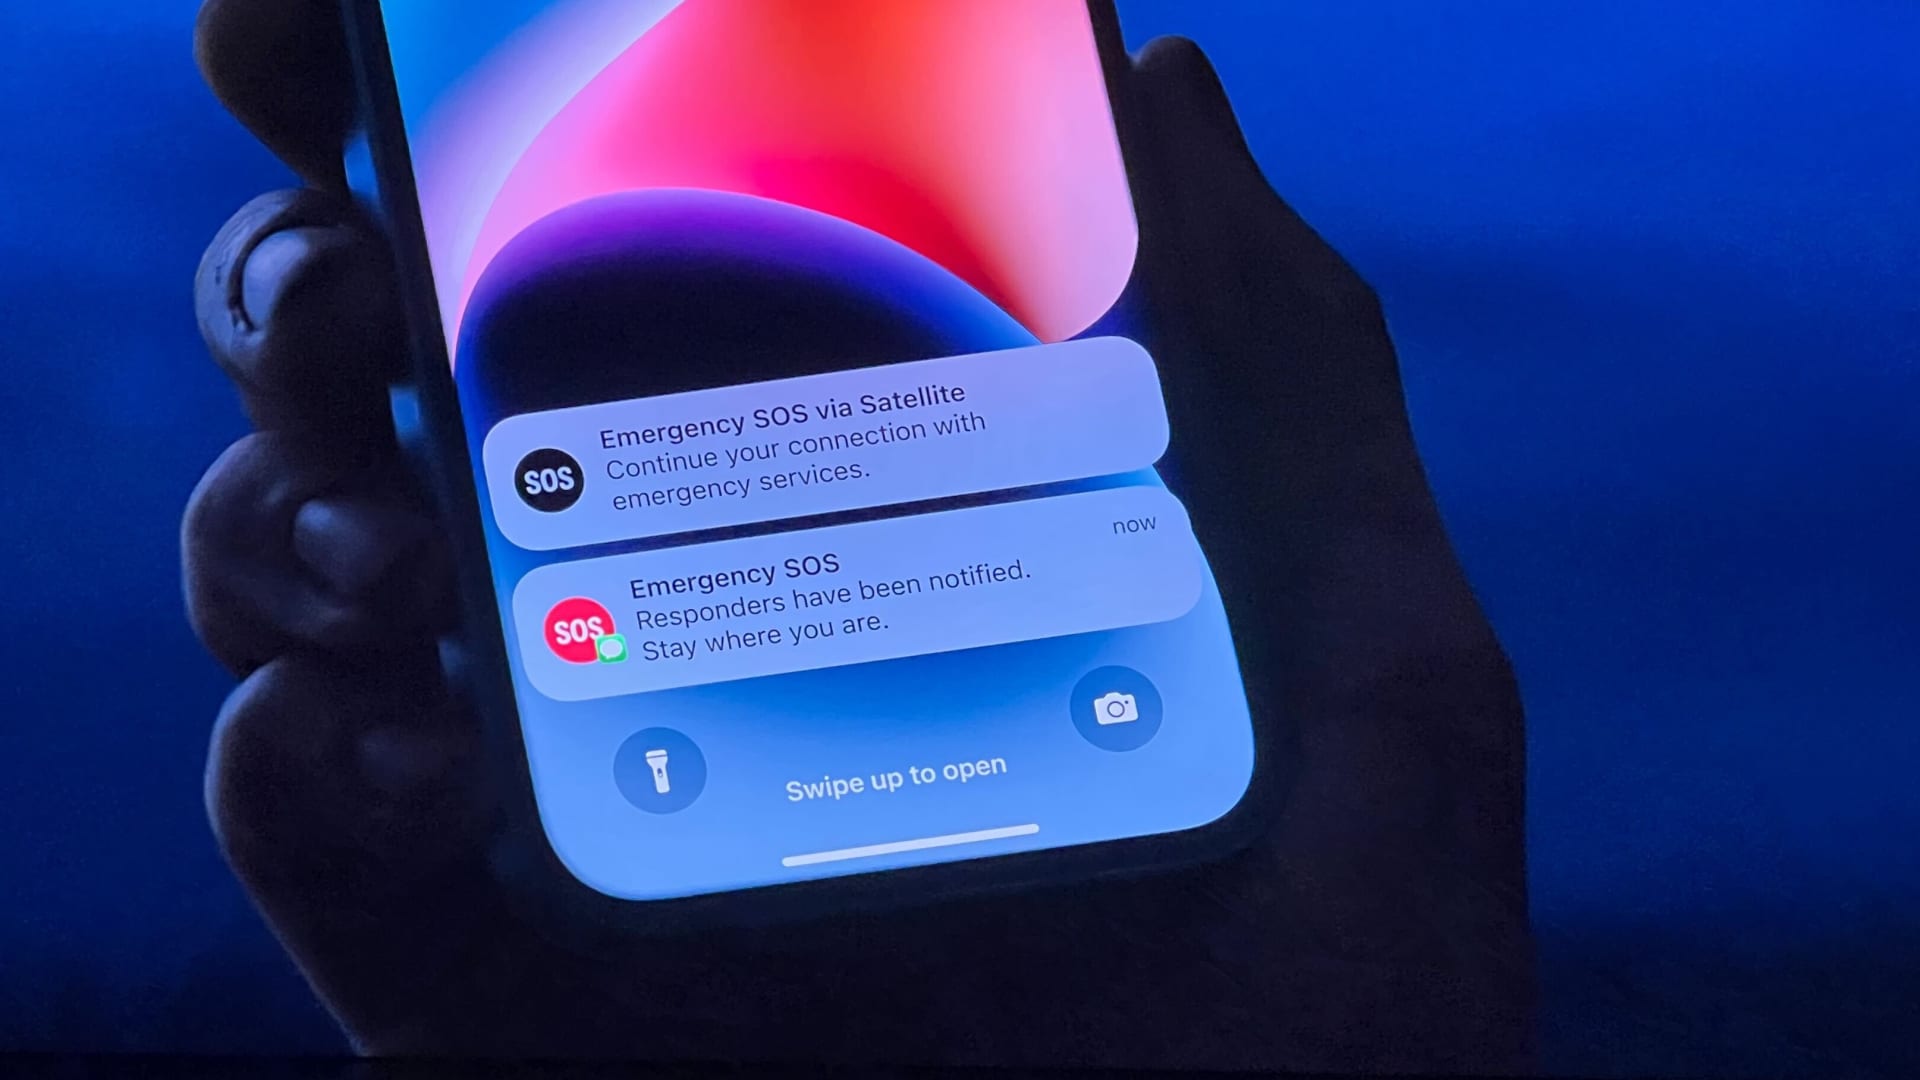 Apple event this year had an unusually dark undertone as it leaned into emergency features for a dangerous world – CNBC